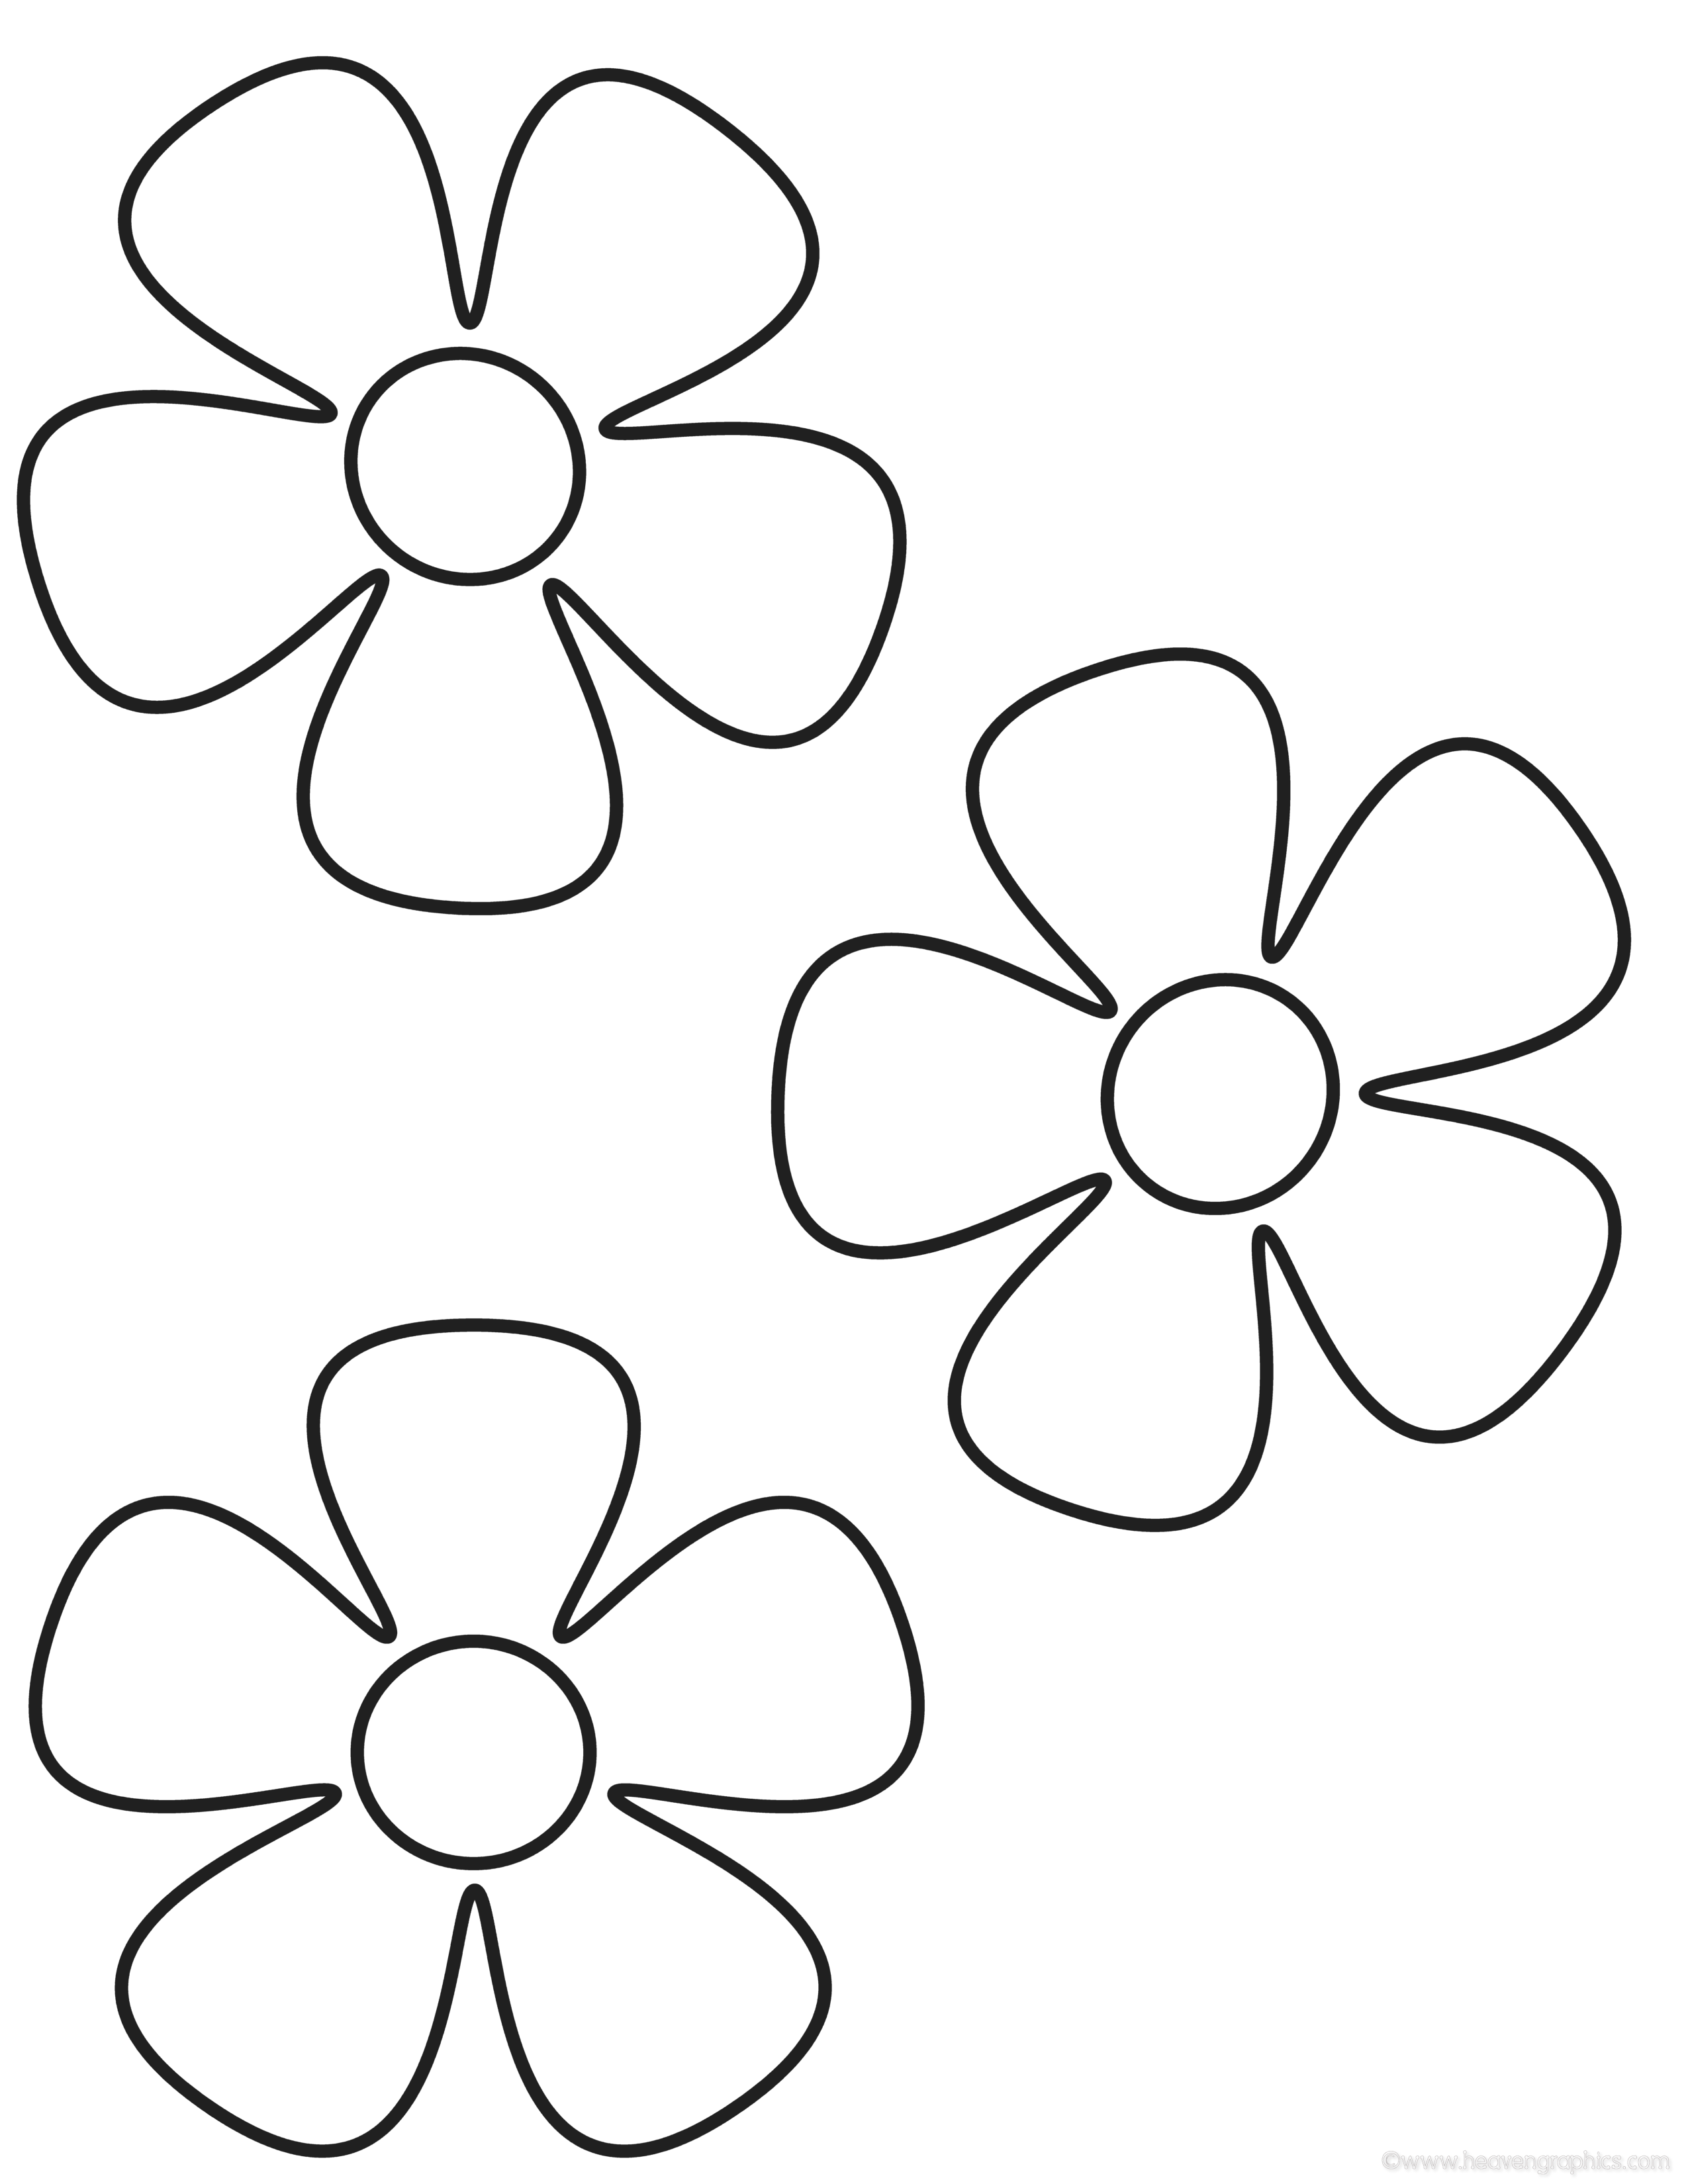 Simple Flower Colouring Pages Printable Coloring Pages